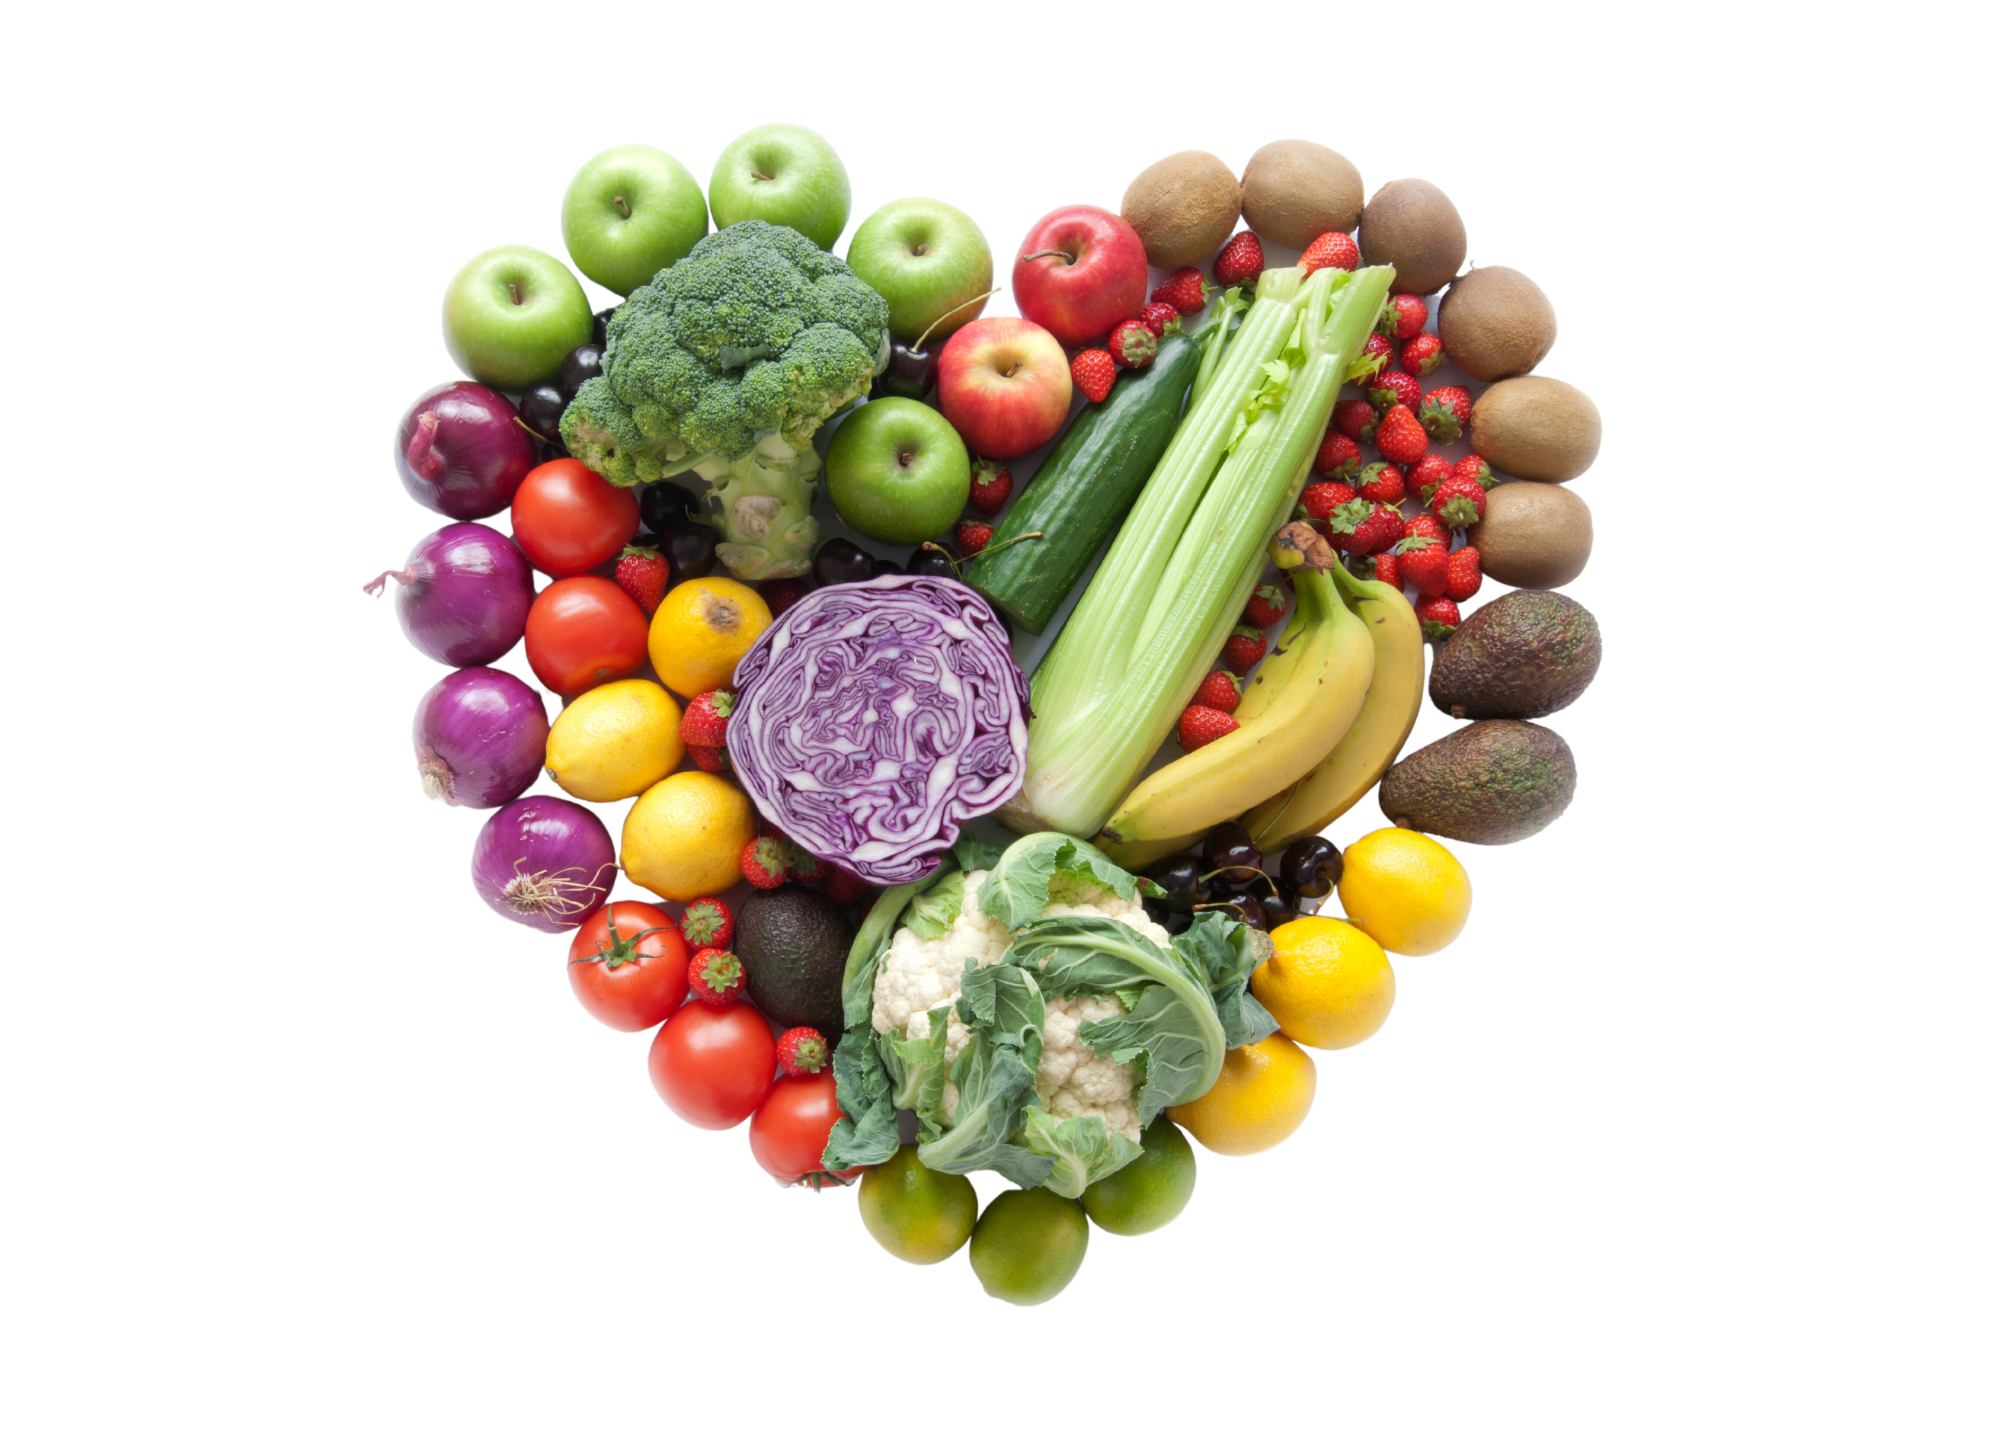 heart-shaped grouping of fruits and vegetables